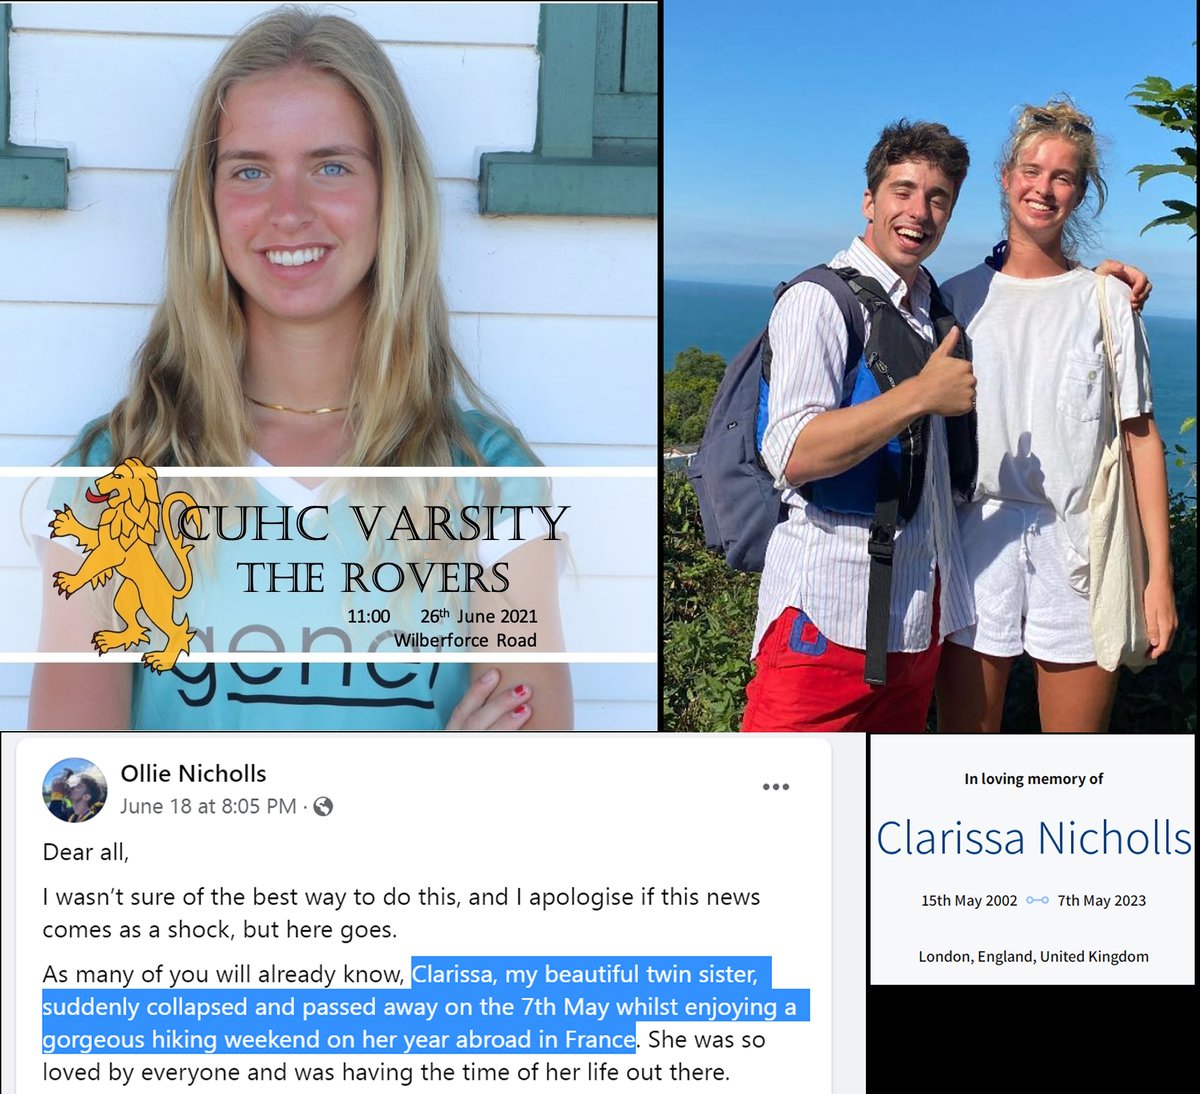 London, UK - 20 yo Clarissa Nicholls collapsed & died suddenly from cardiac arrest on May 7, 2023 while hiking in France.

COVID-19 mRNA vaccines cause myocarditis in 1 in 30 people, women affected equally as men. 

⬆️ risk of sudden cardiac arrest

#DiedSuddenly #cdnpoli #ableg